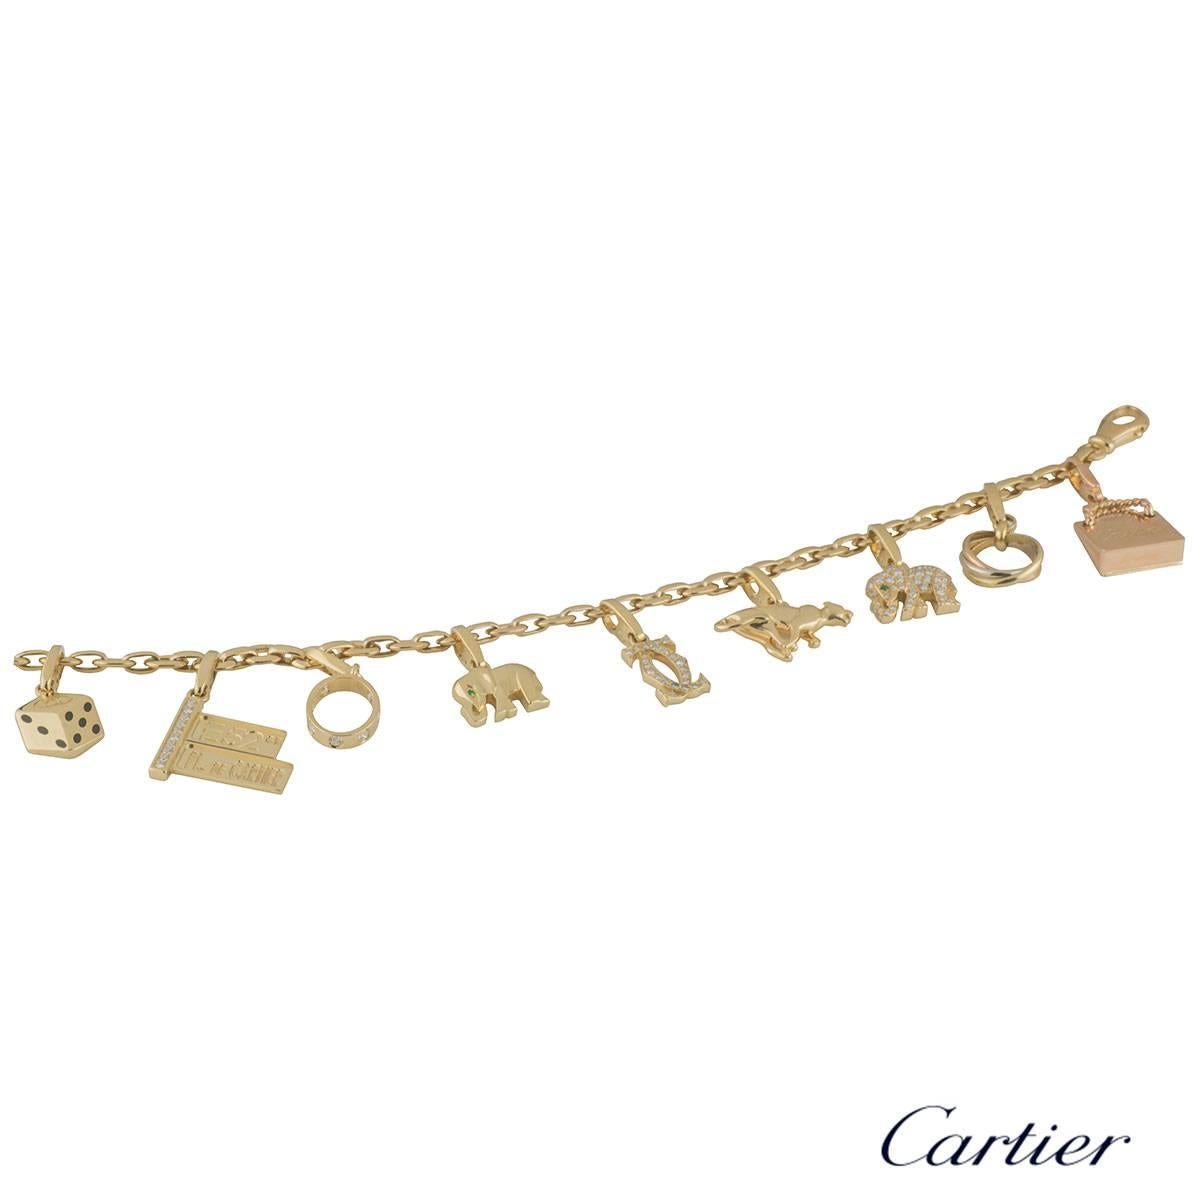 A unique 18k yellow gold Cartier charm bracelet. The bracelet comprises of a yellow gold flat cable chain with 9 Cartier charms. The first charm is a mini Trinity de Cartier ring in tri colour gold. The second charm is a rose gold Cartier bag with